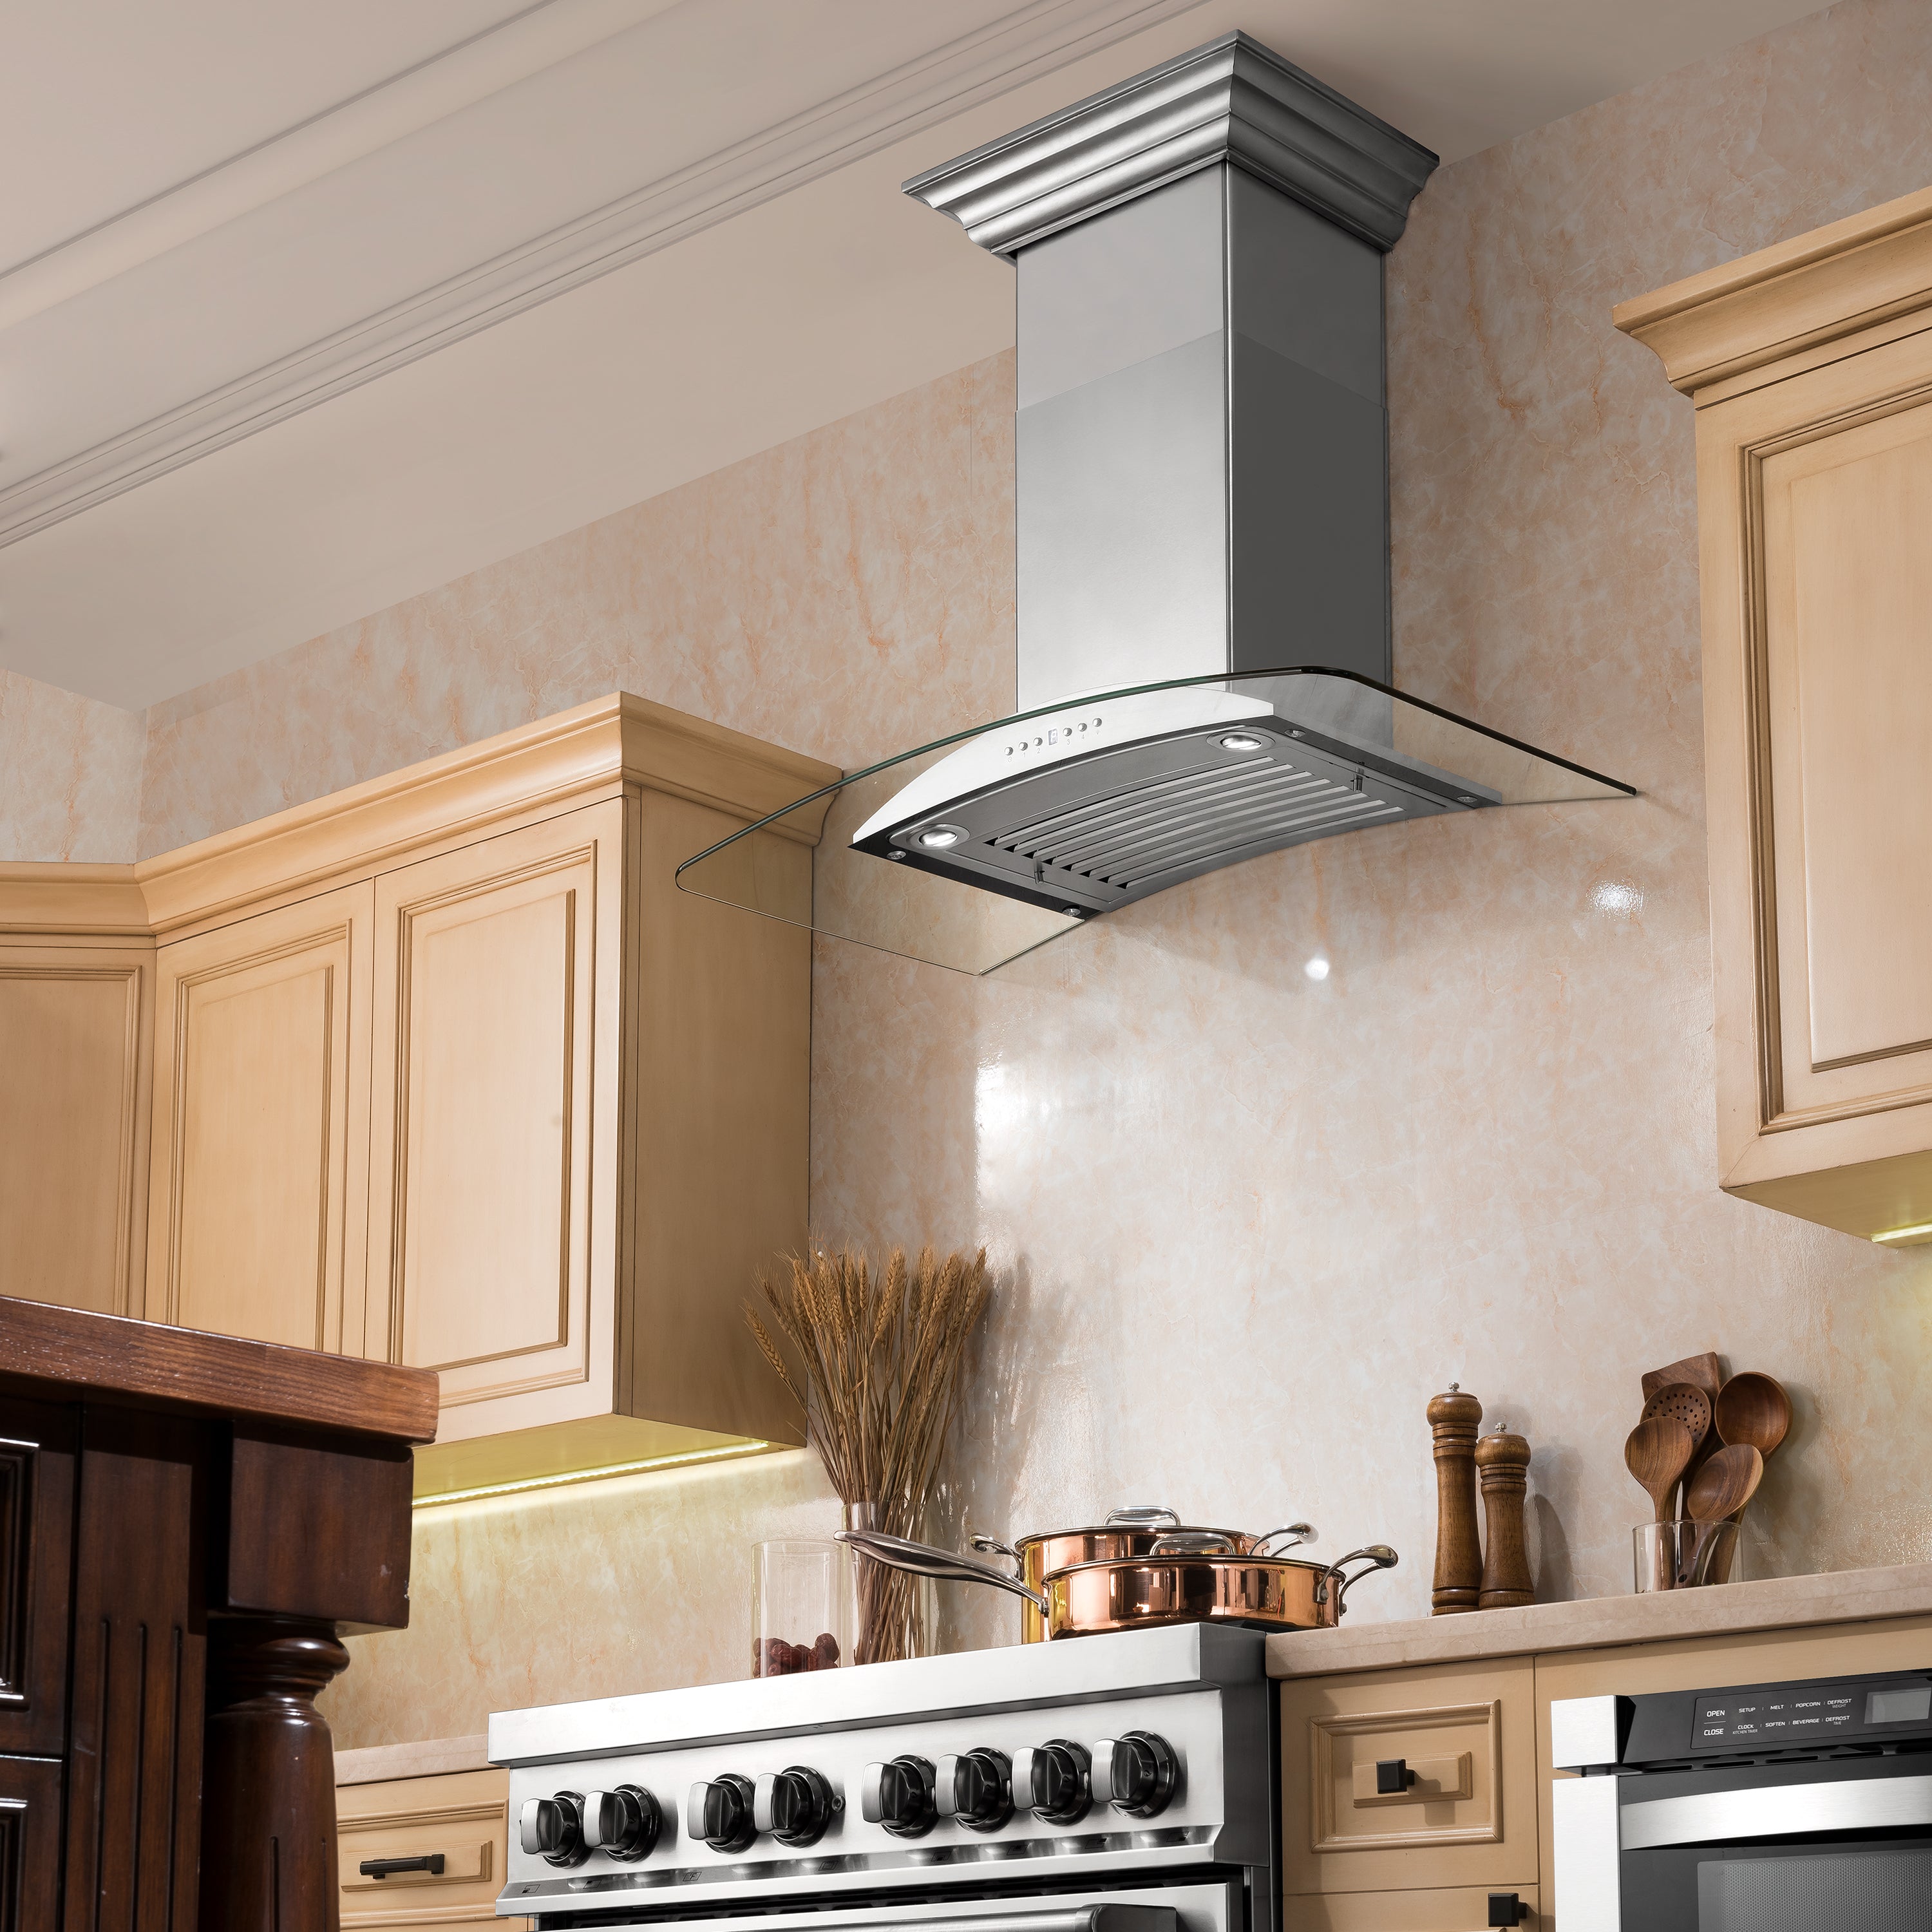 36" ZLINE CrownSound‚Äö Ducted Vent Wall Mount Range Hood in Stainless Steel with Built-in Bluetooth Speakers (KNCRN-BT-36)